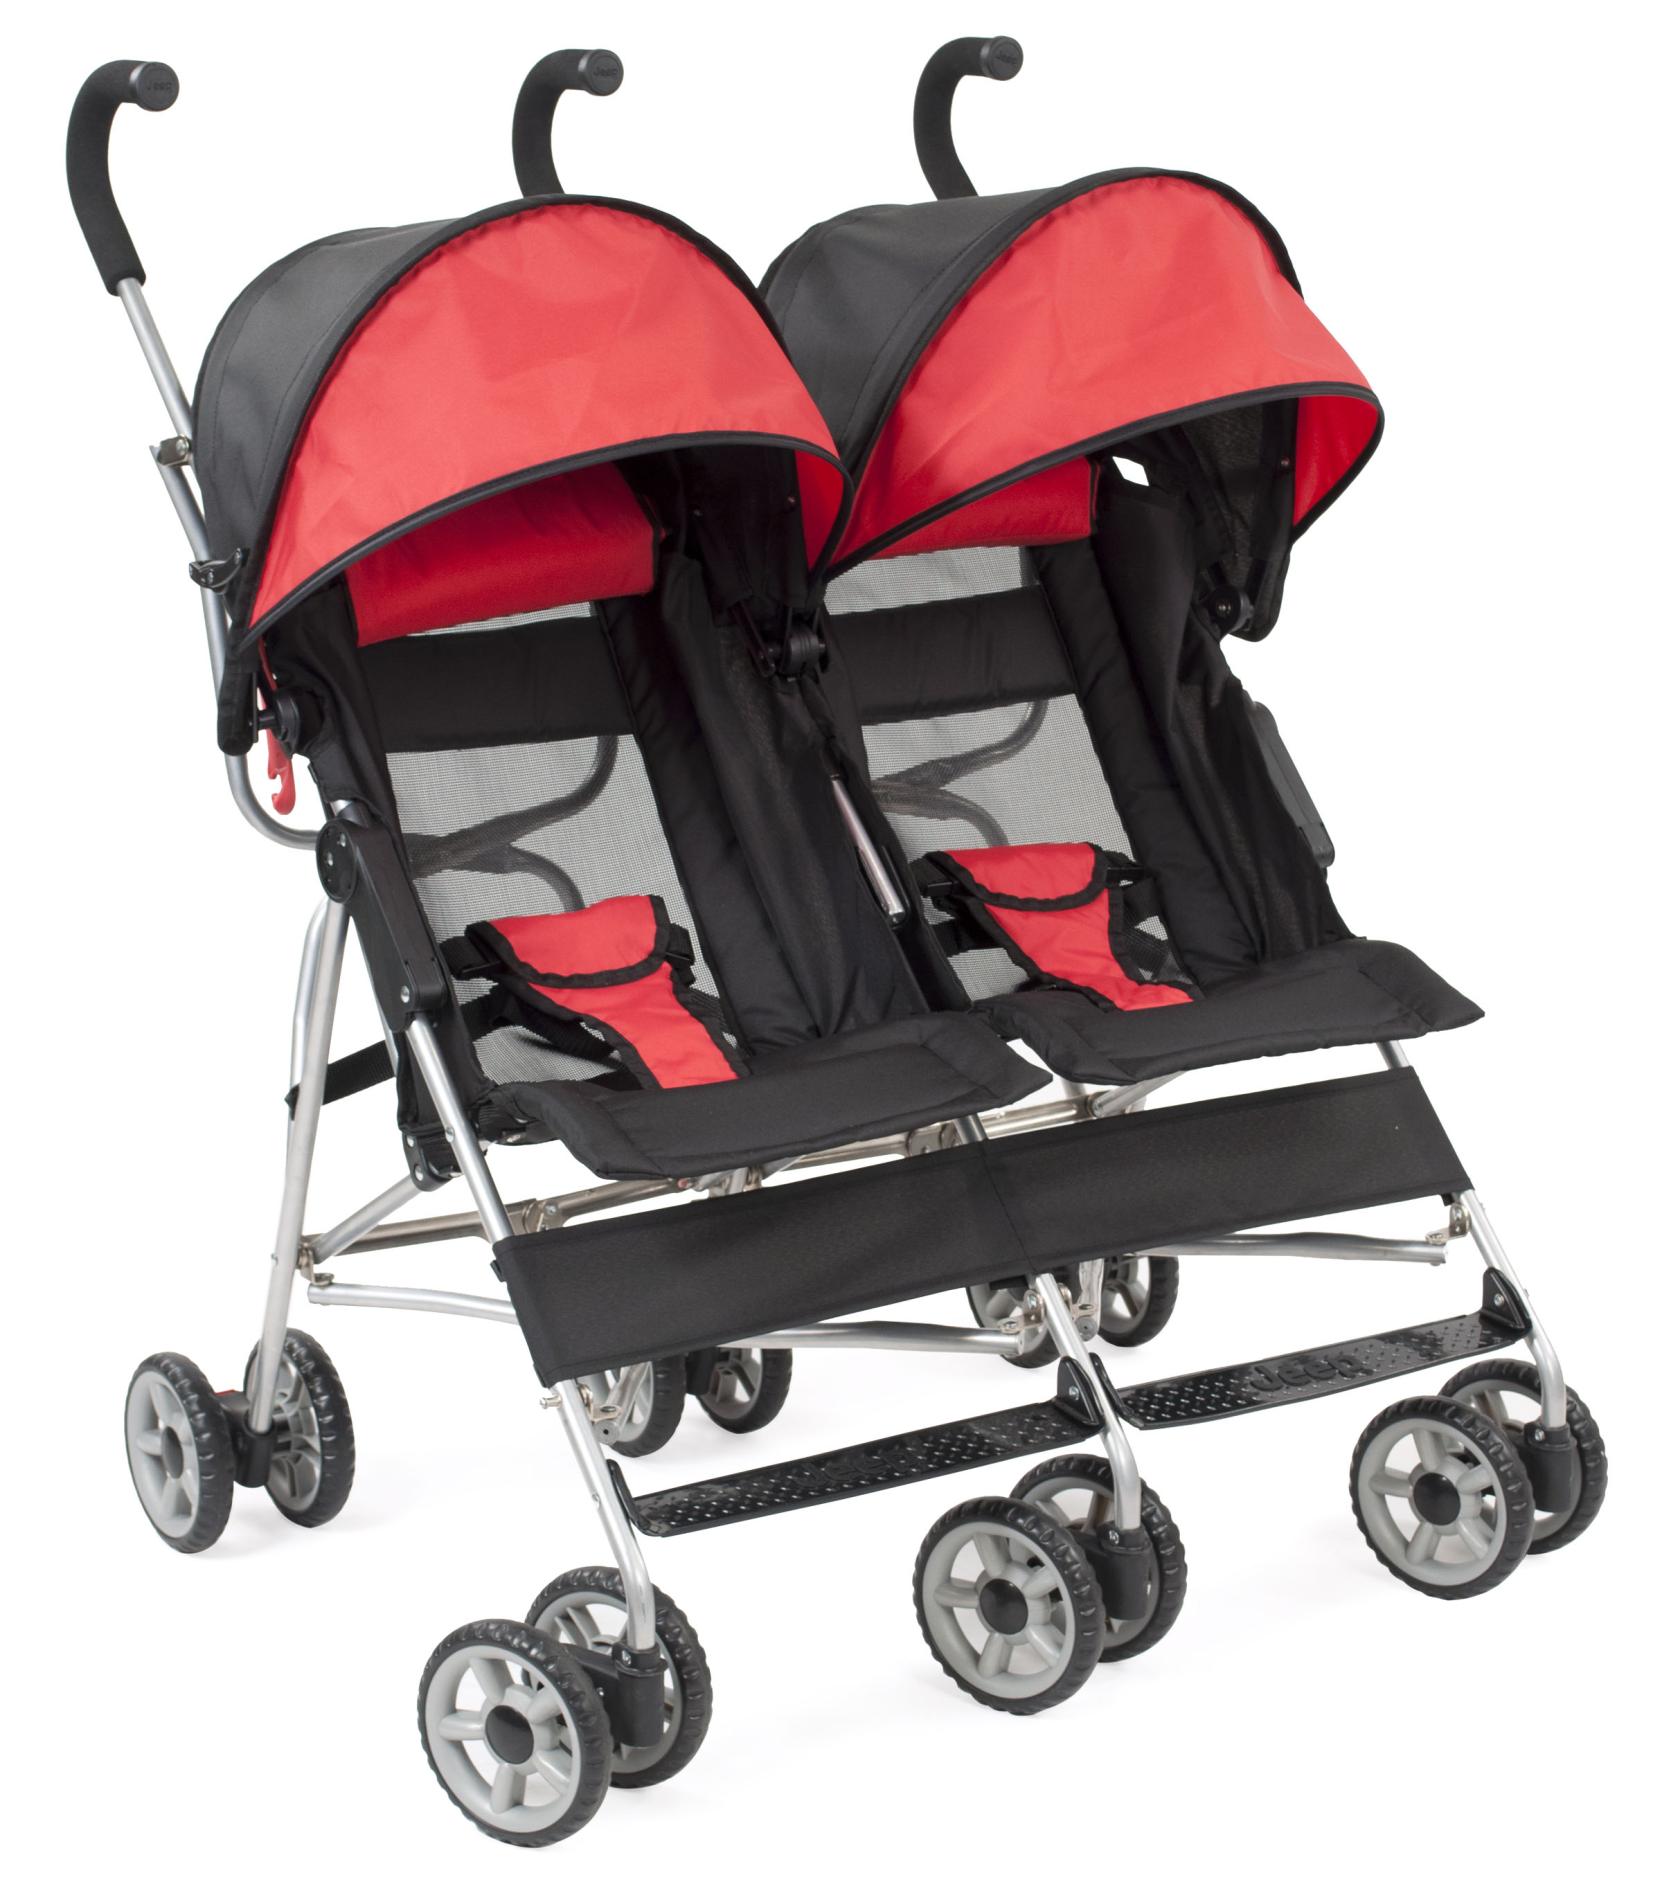 Strollers \u0026 Travel Systems: Double - Kmart